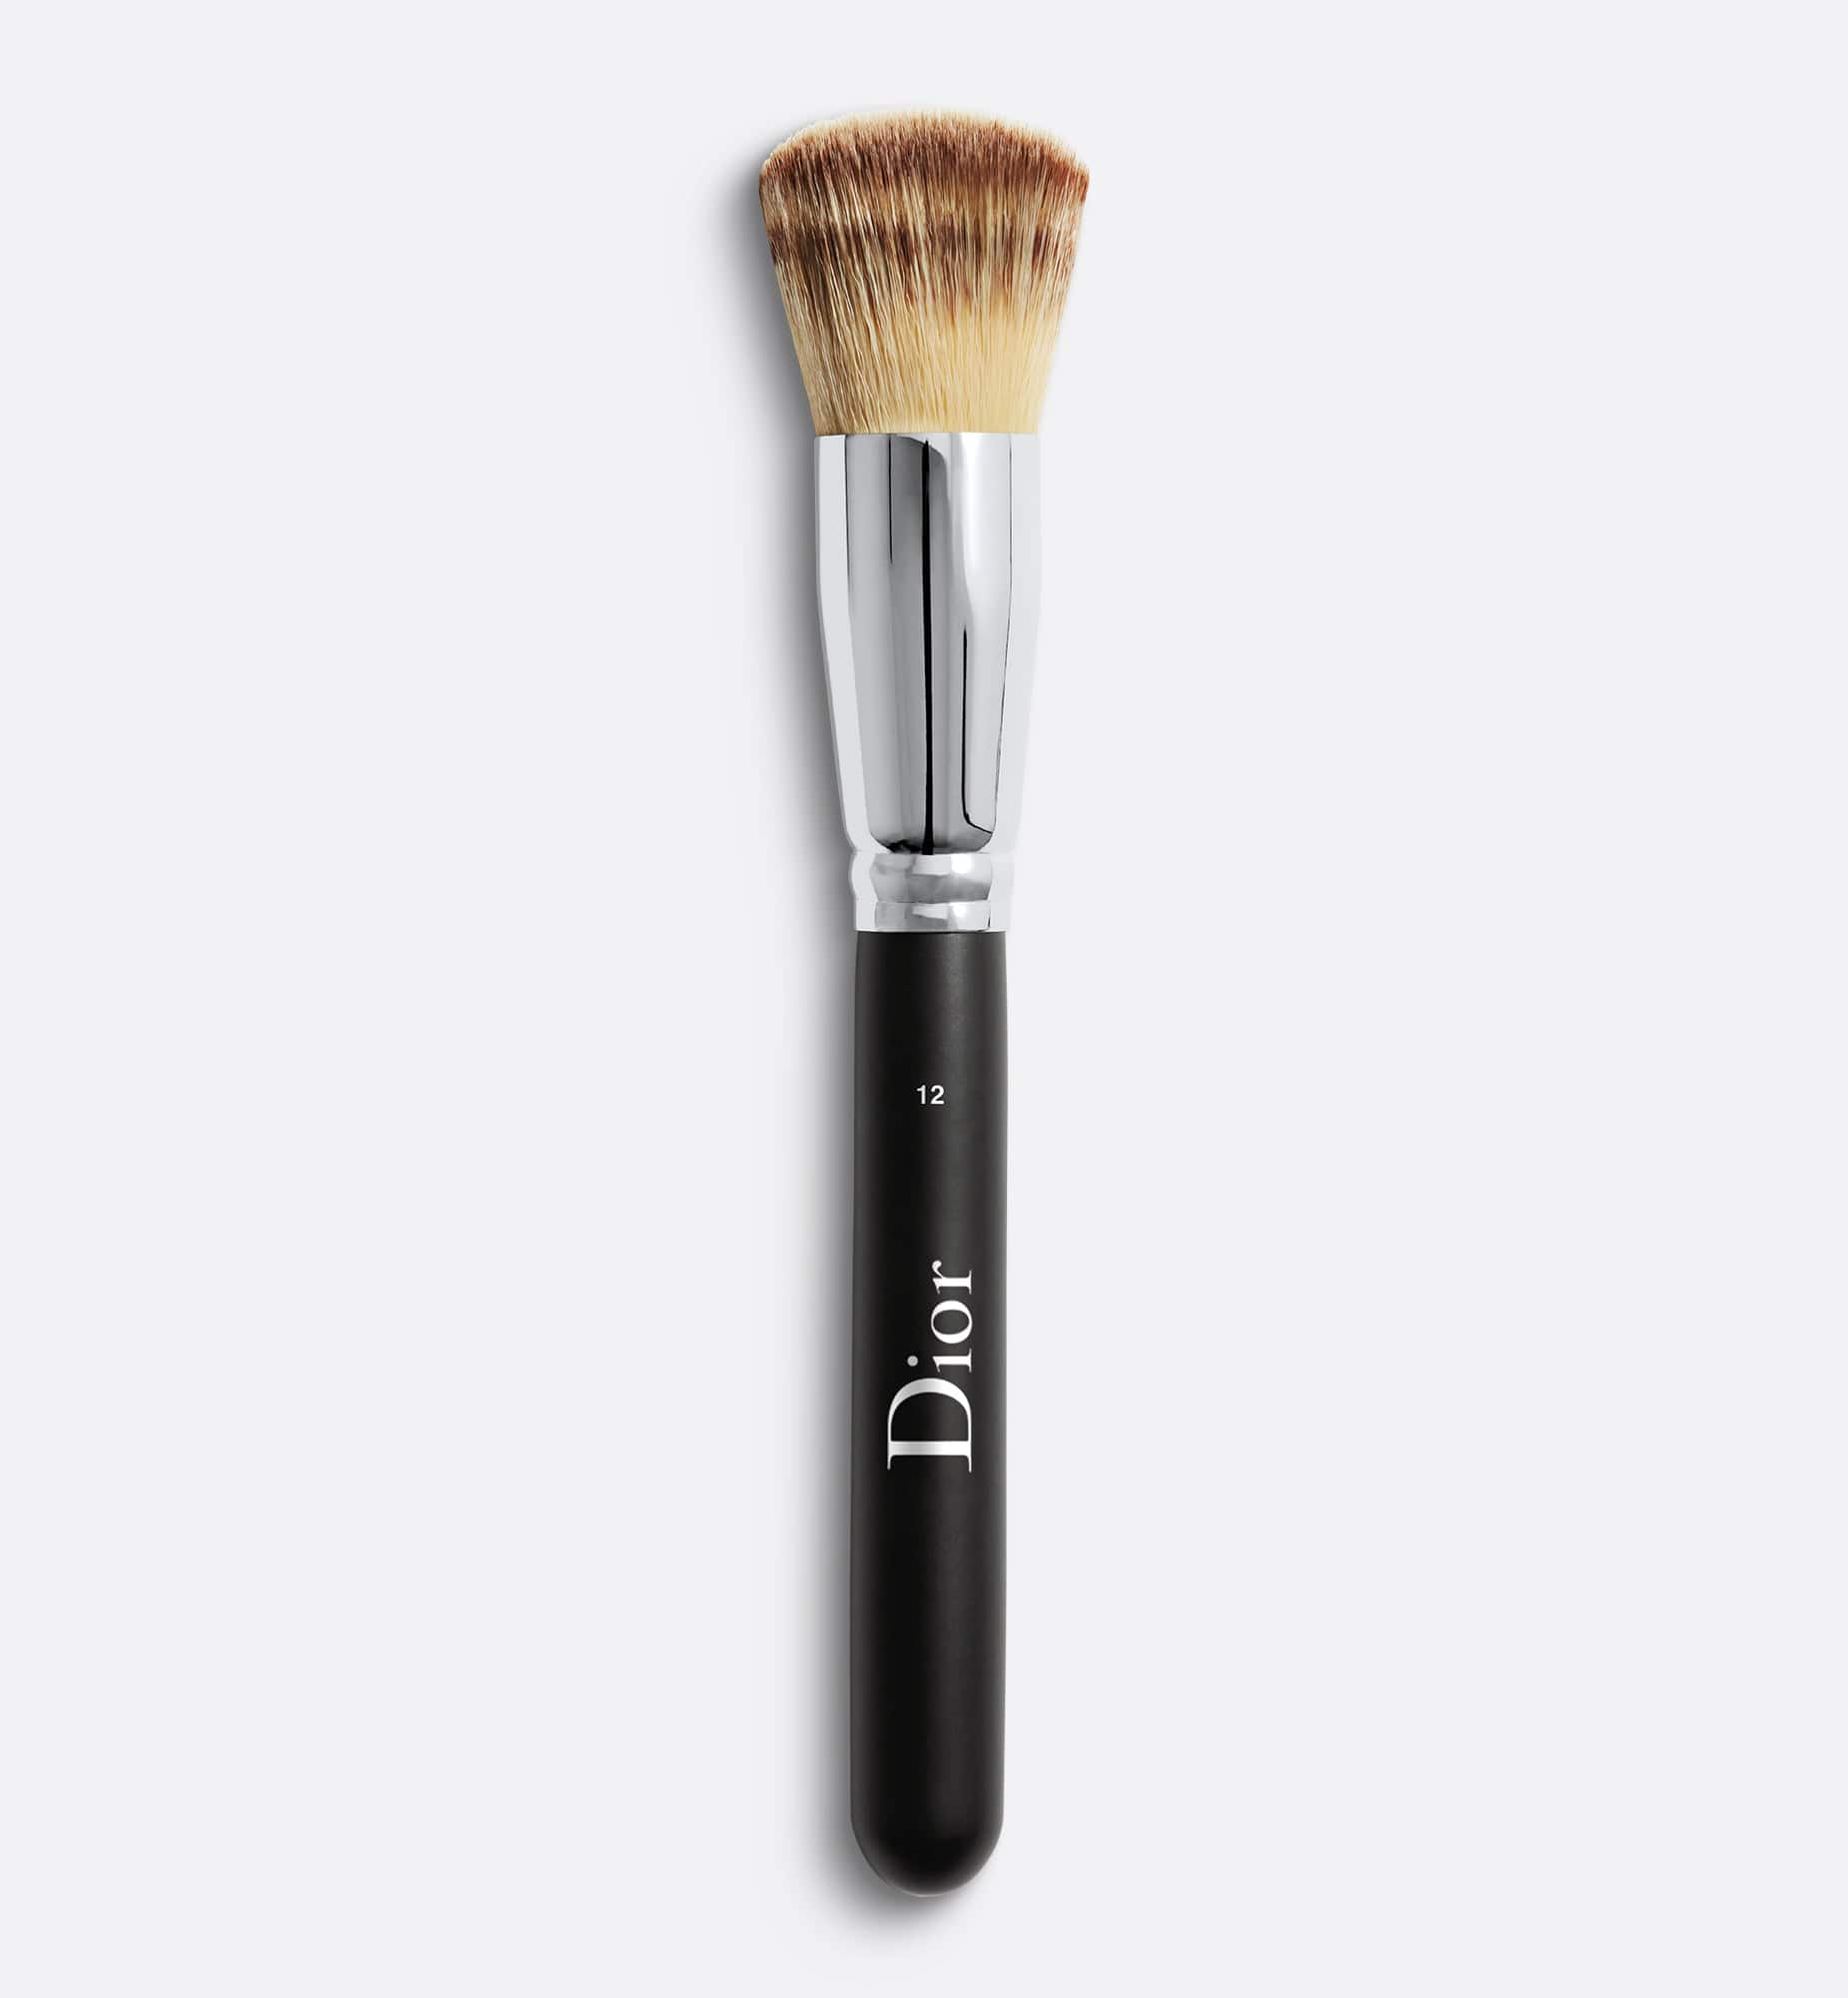 Dior Backstage Full Coverage Fluid Foundation Brush N°12 | Full Coverage Use